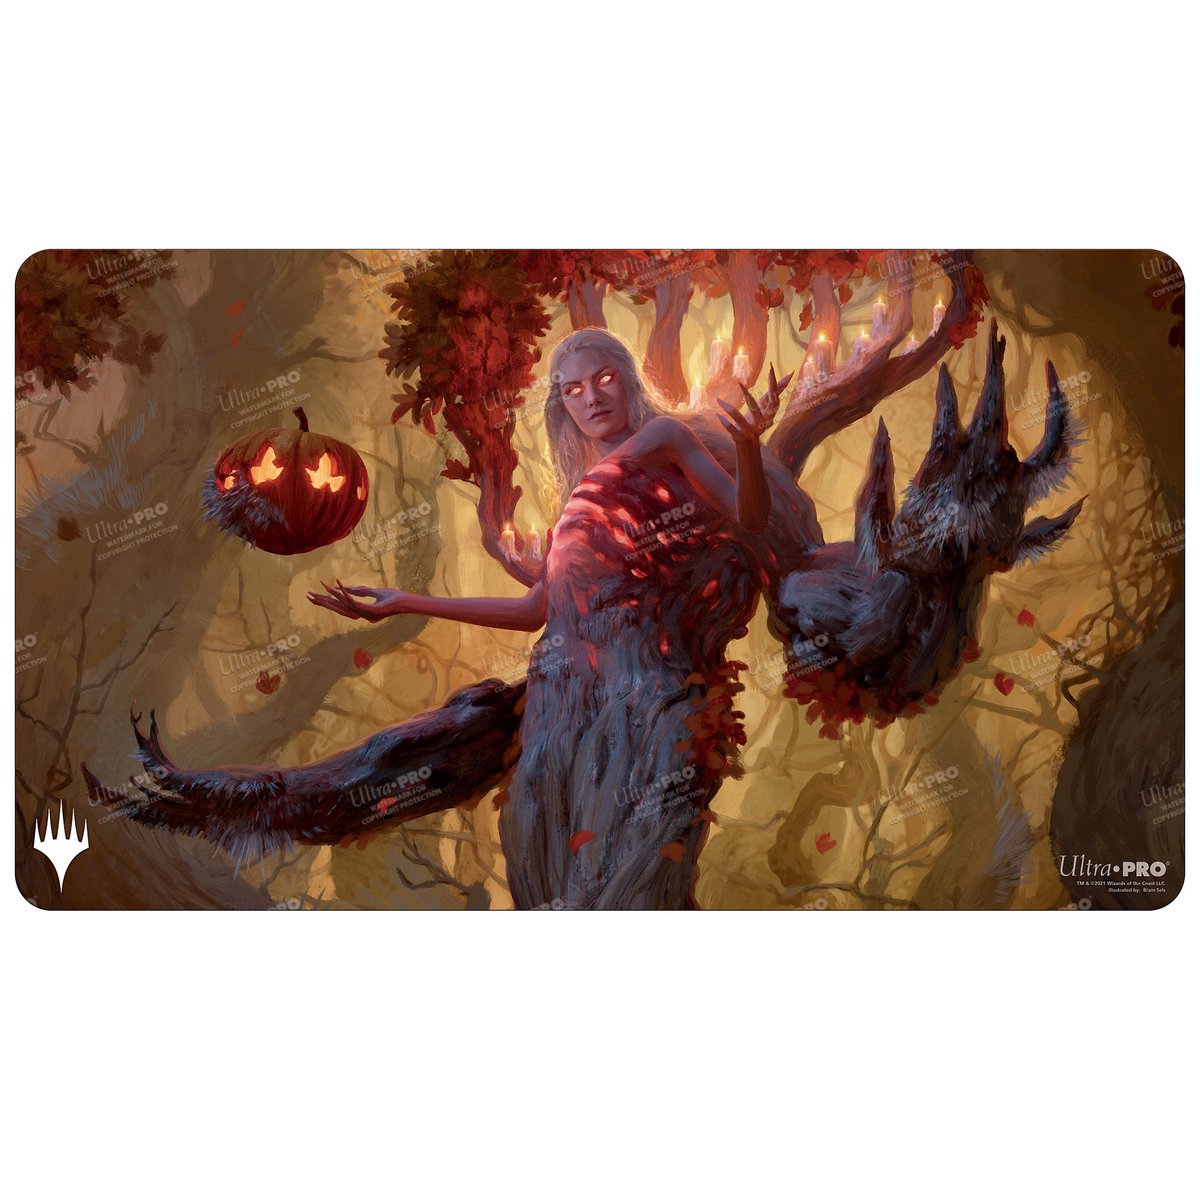 Innistrad: Midnight Hunt Wrenn and Seven Standard Gaming Playmat for Magic: The Gathering